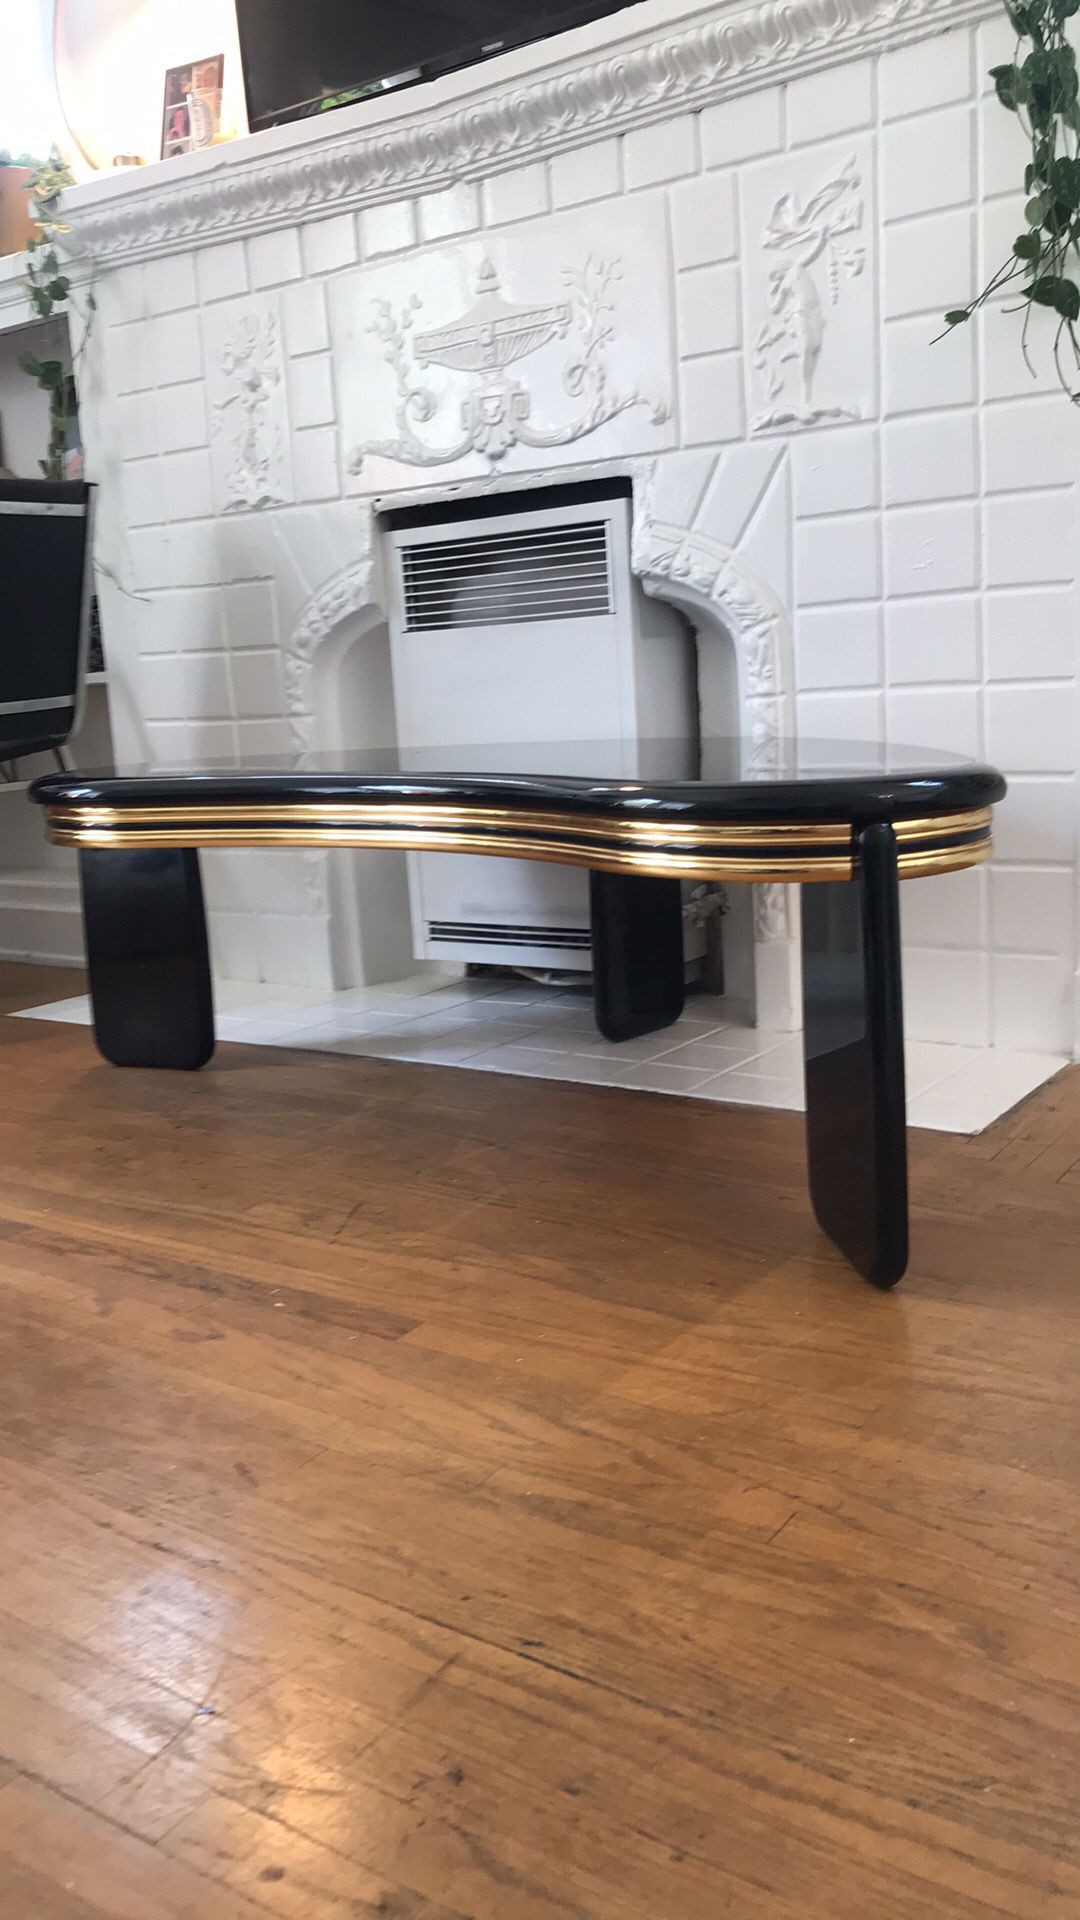 Vintage 80s Black and Gold Laminate Kidney Shaped Coffee Table